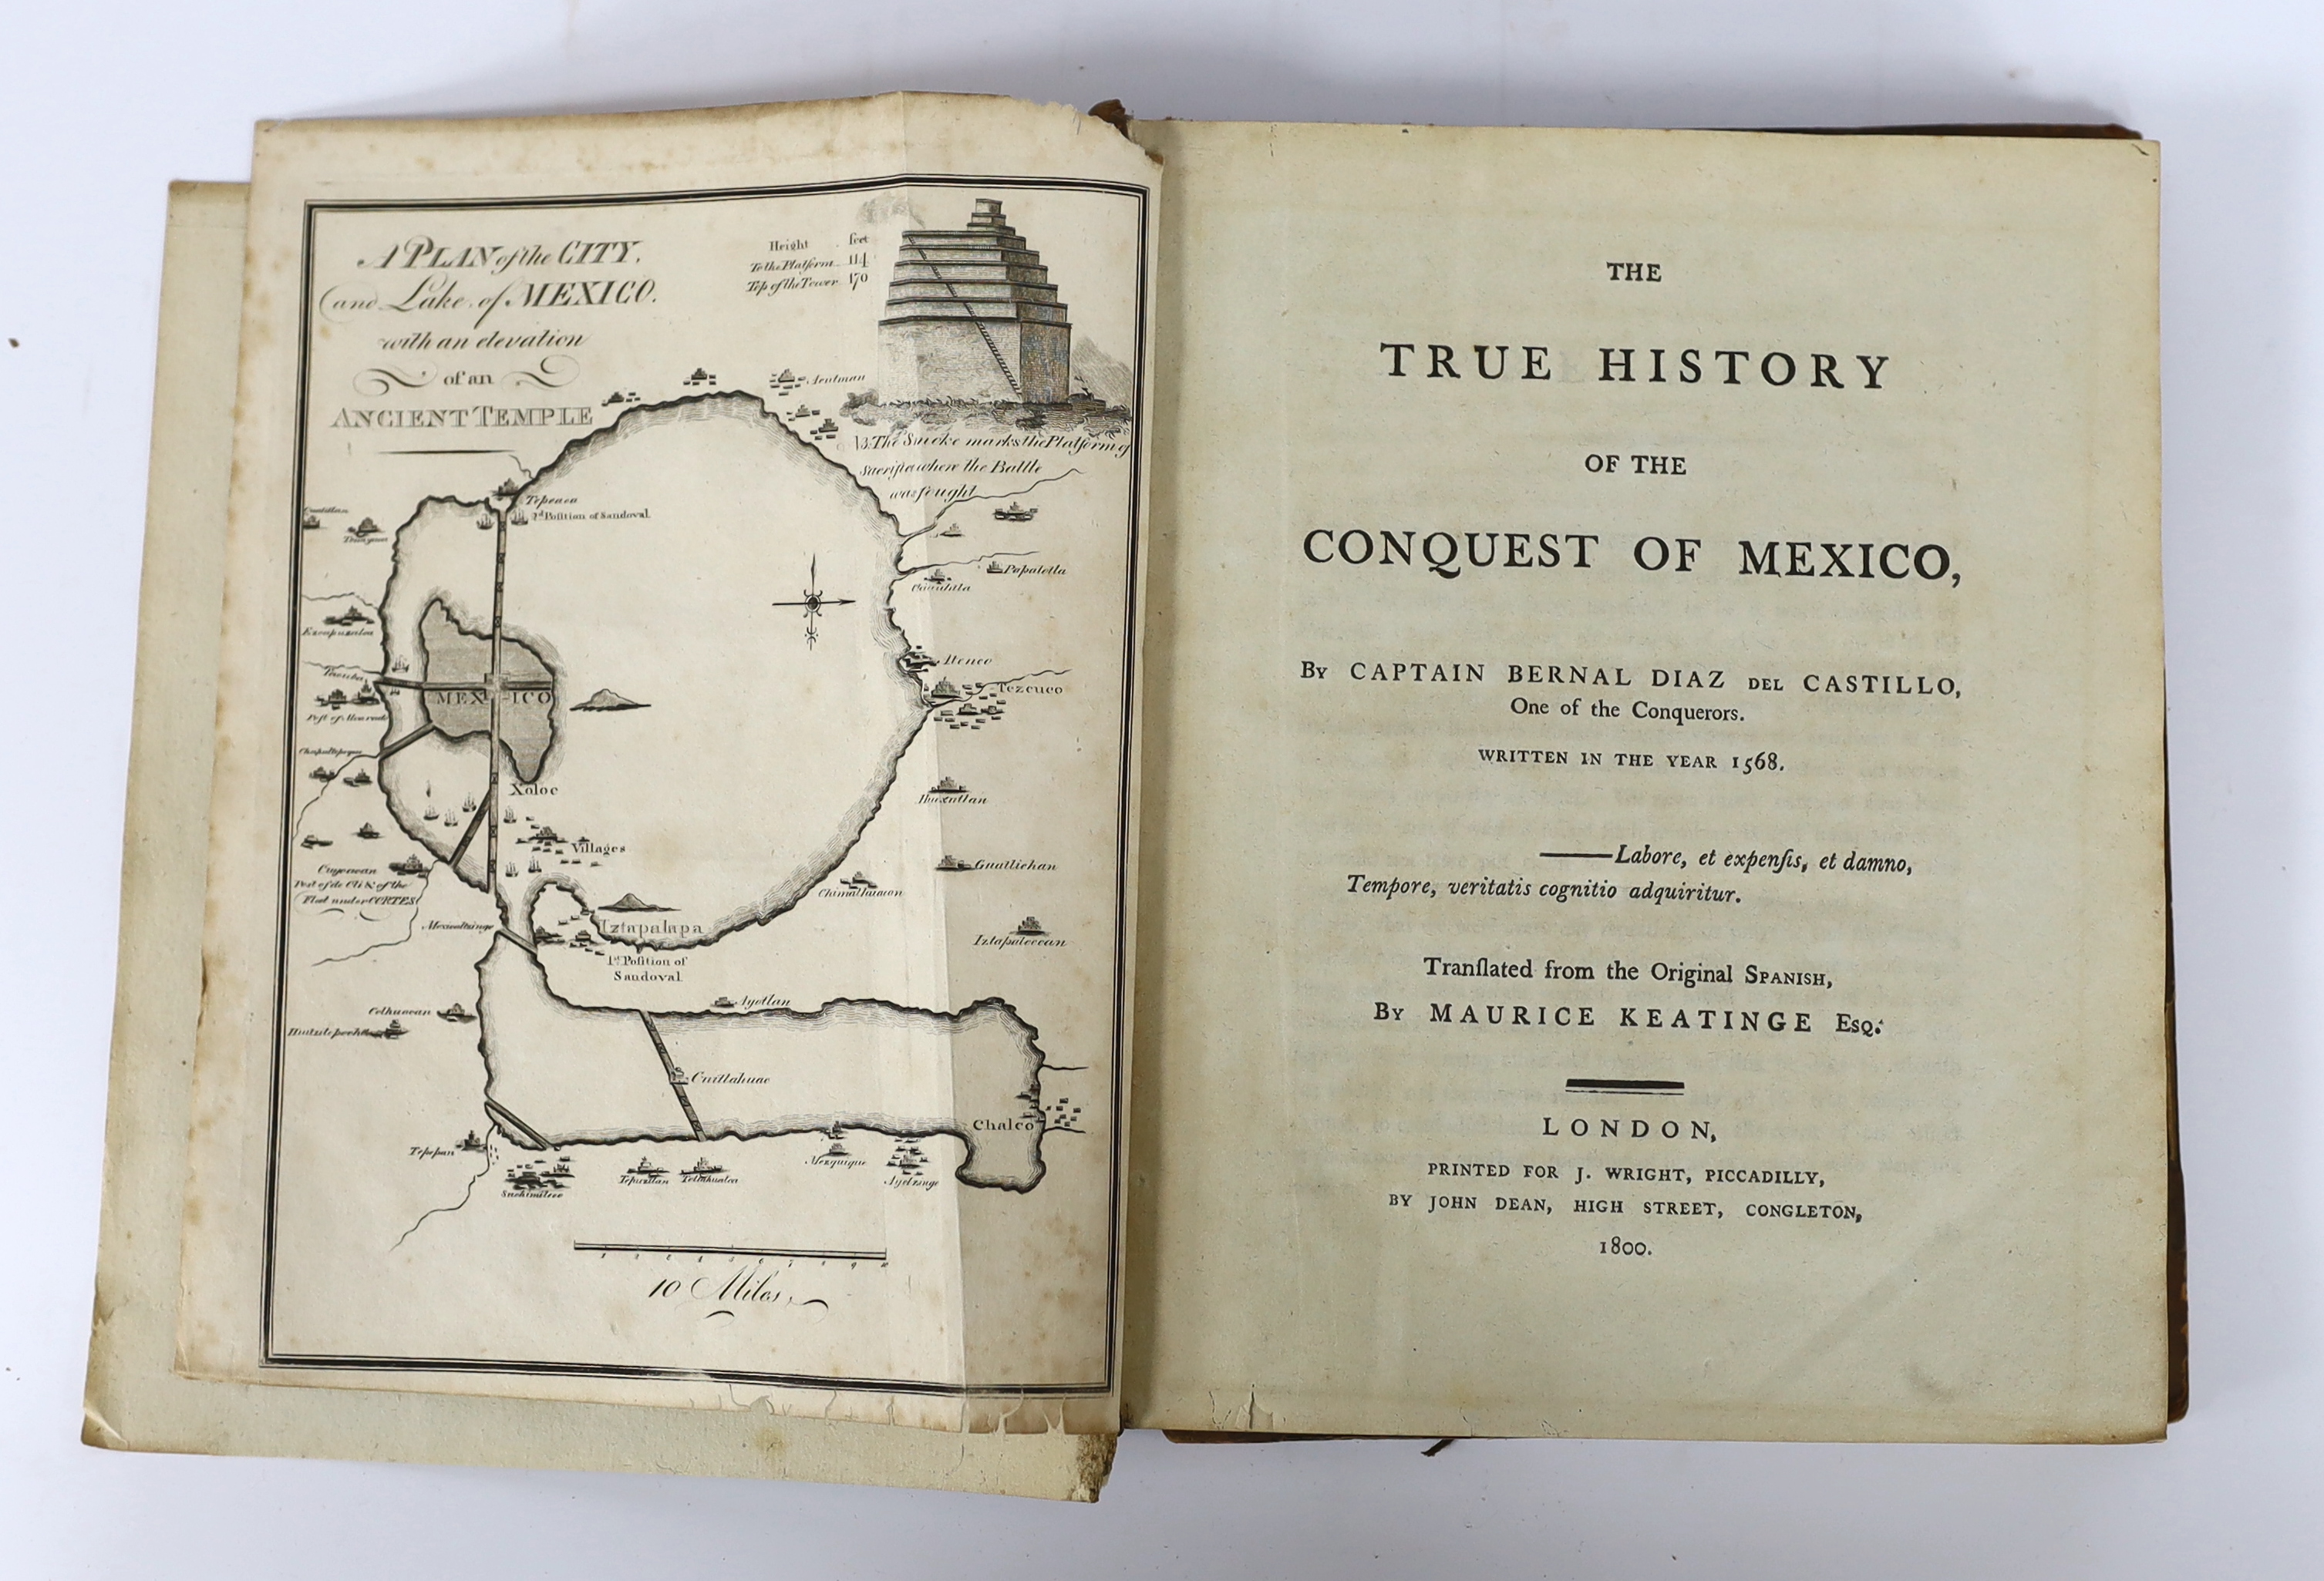 Del Castillo, Capt. Bernal Diaz - The True History of the Conquest of Mexico....translated from the original Spanish, by Maurice Keating. engraved pictorial plan, errata leaf; old half calf and boards (distressed), 4to.